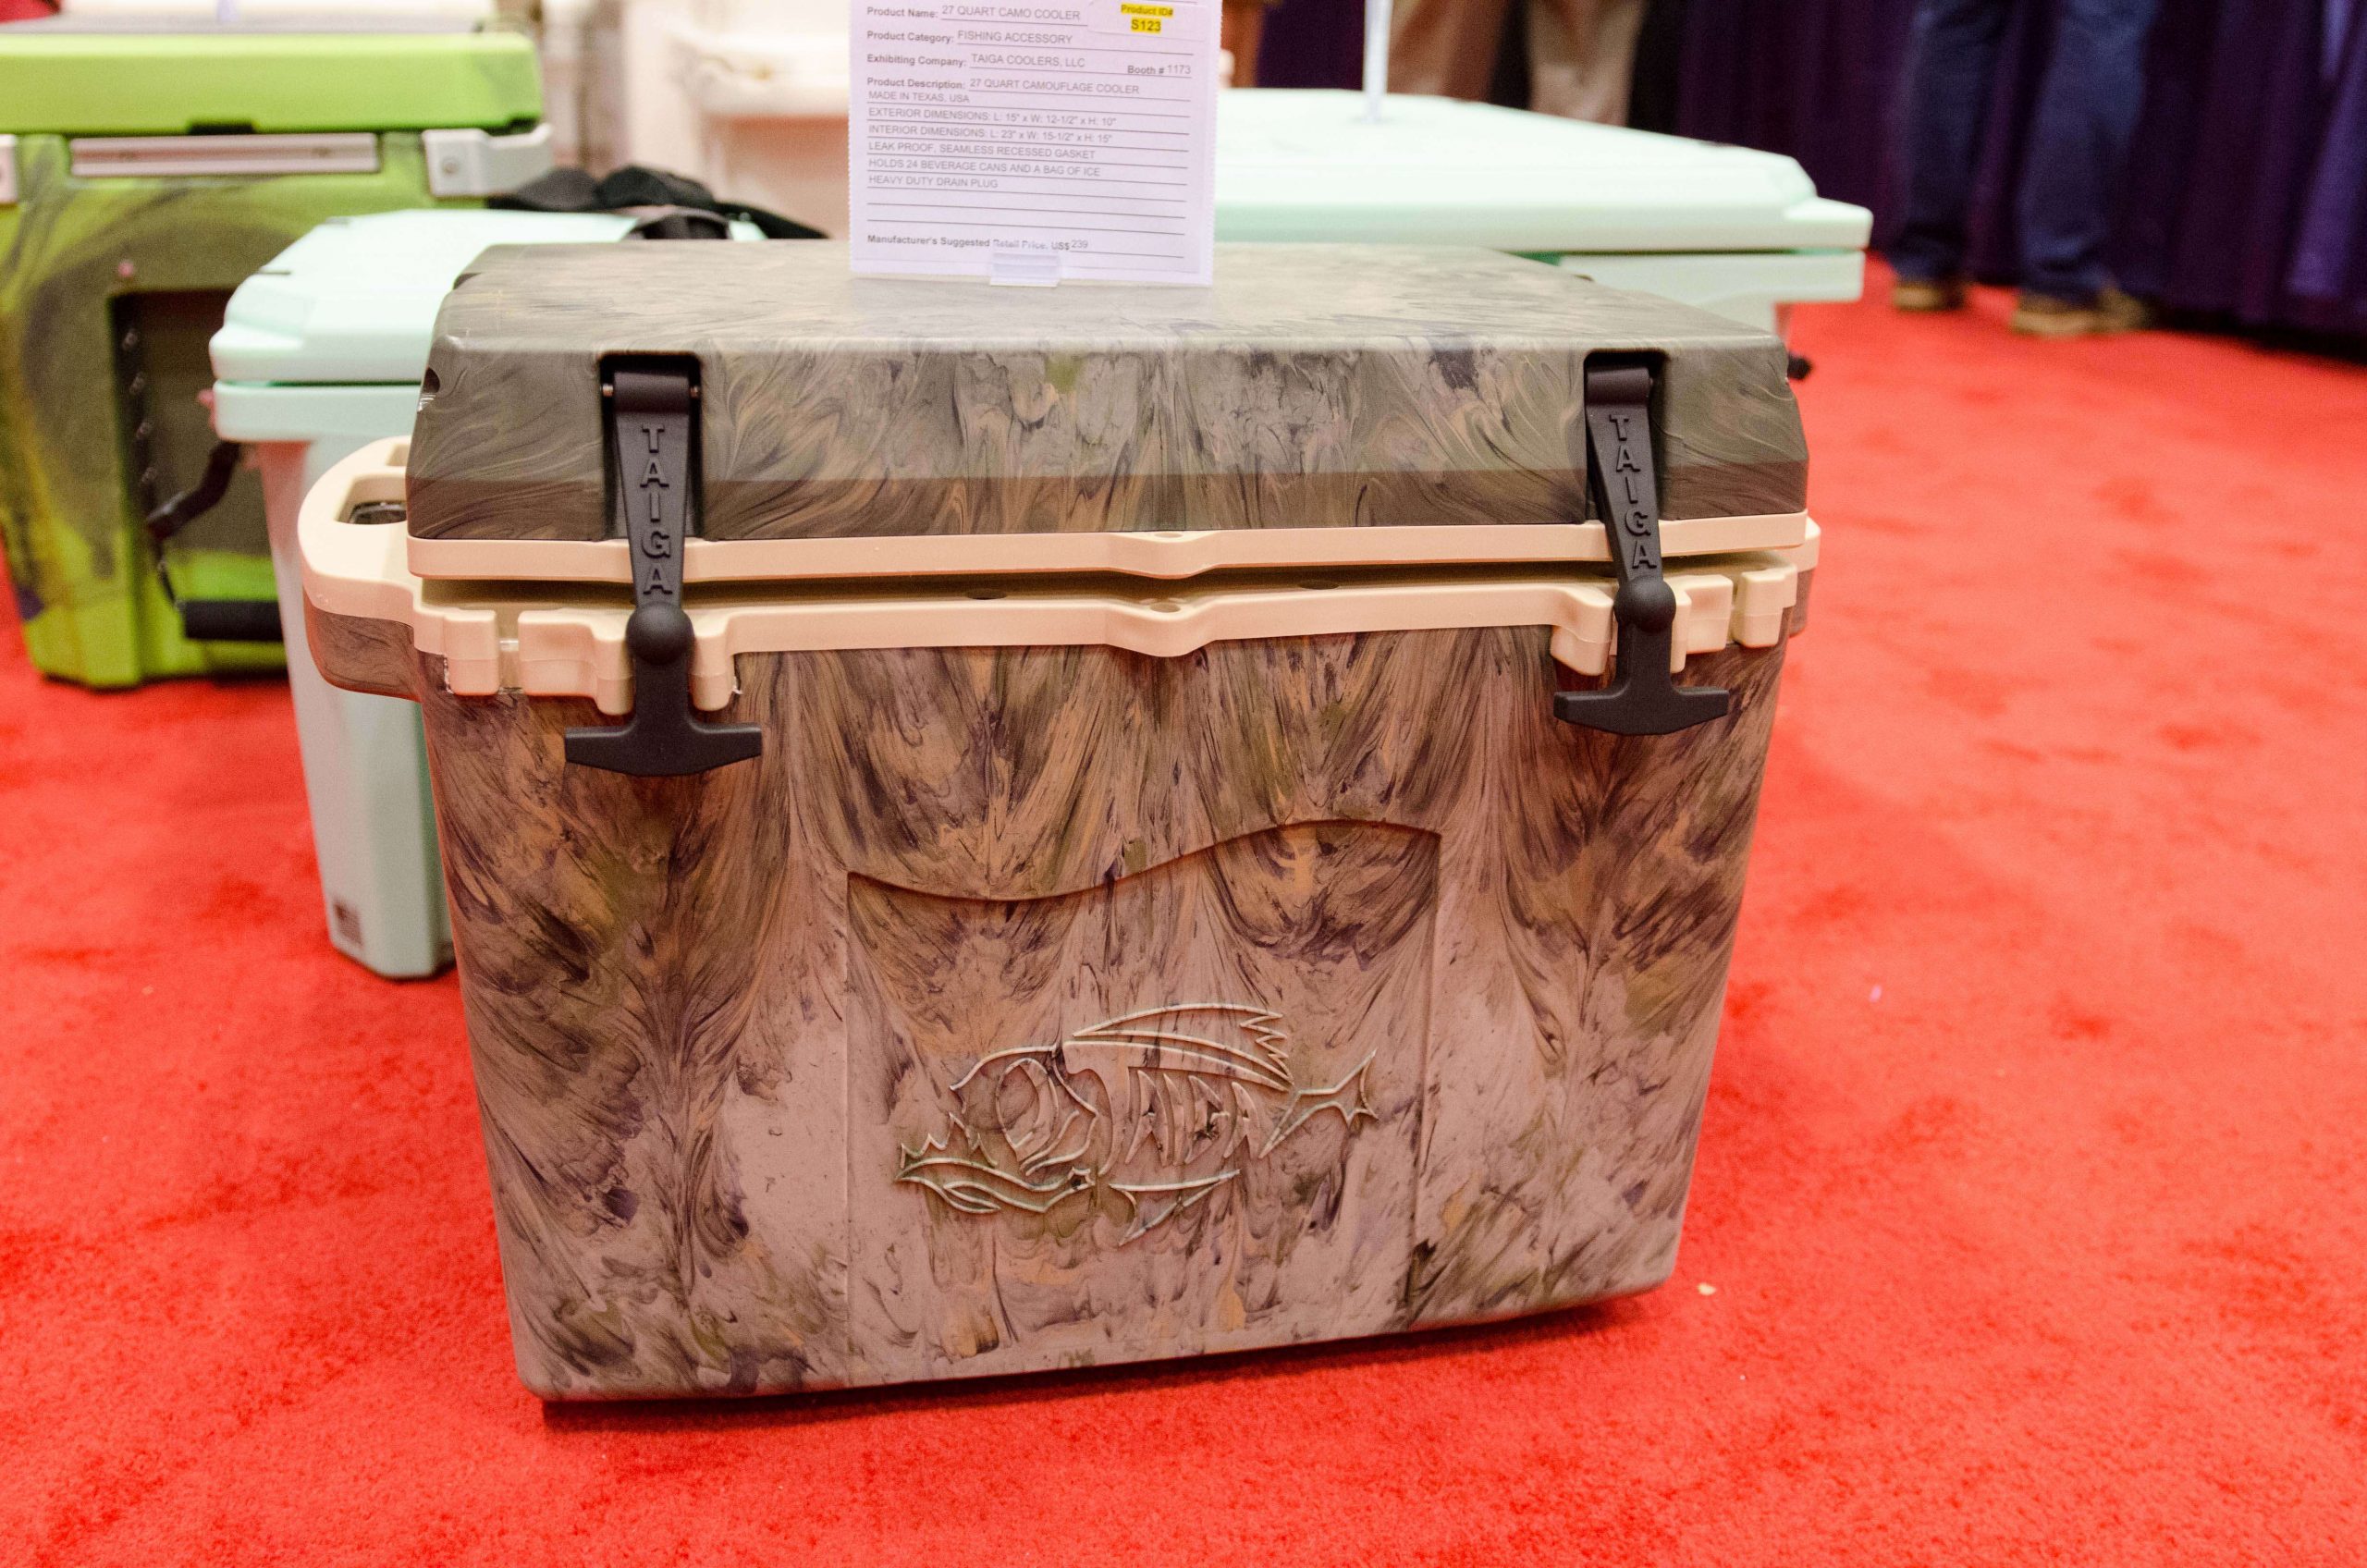 Taiga Coolers created this 27-quart camouflage cooler that holds 24 beverage cans.